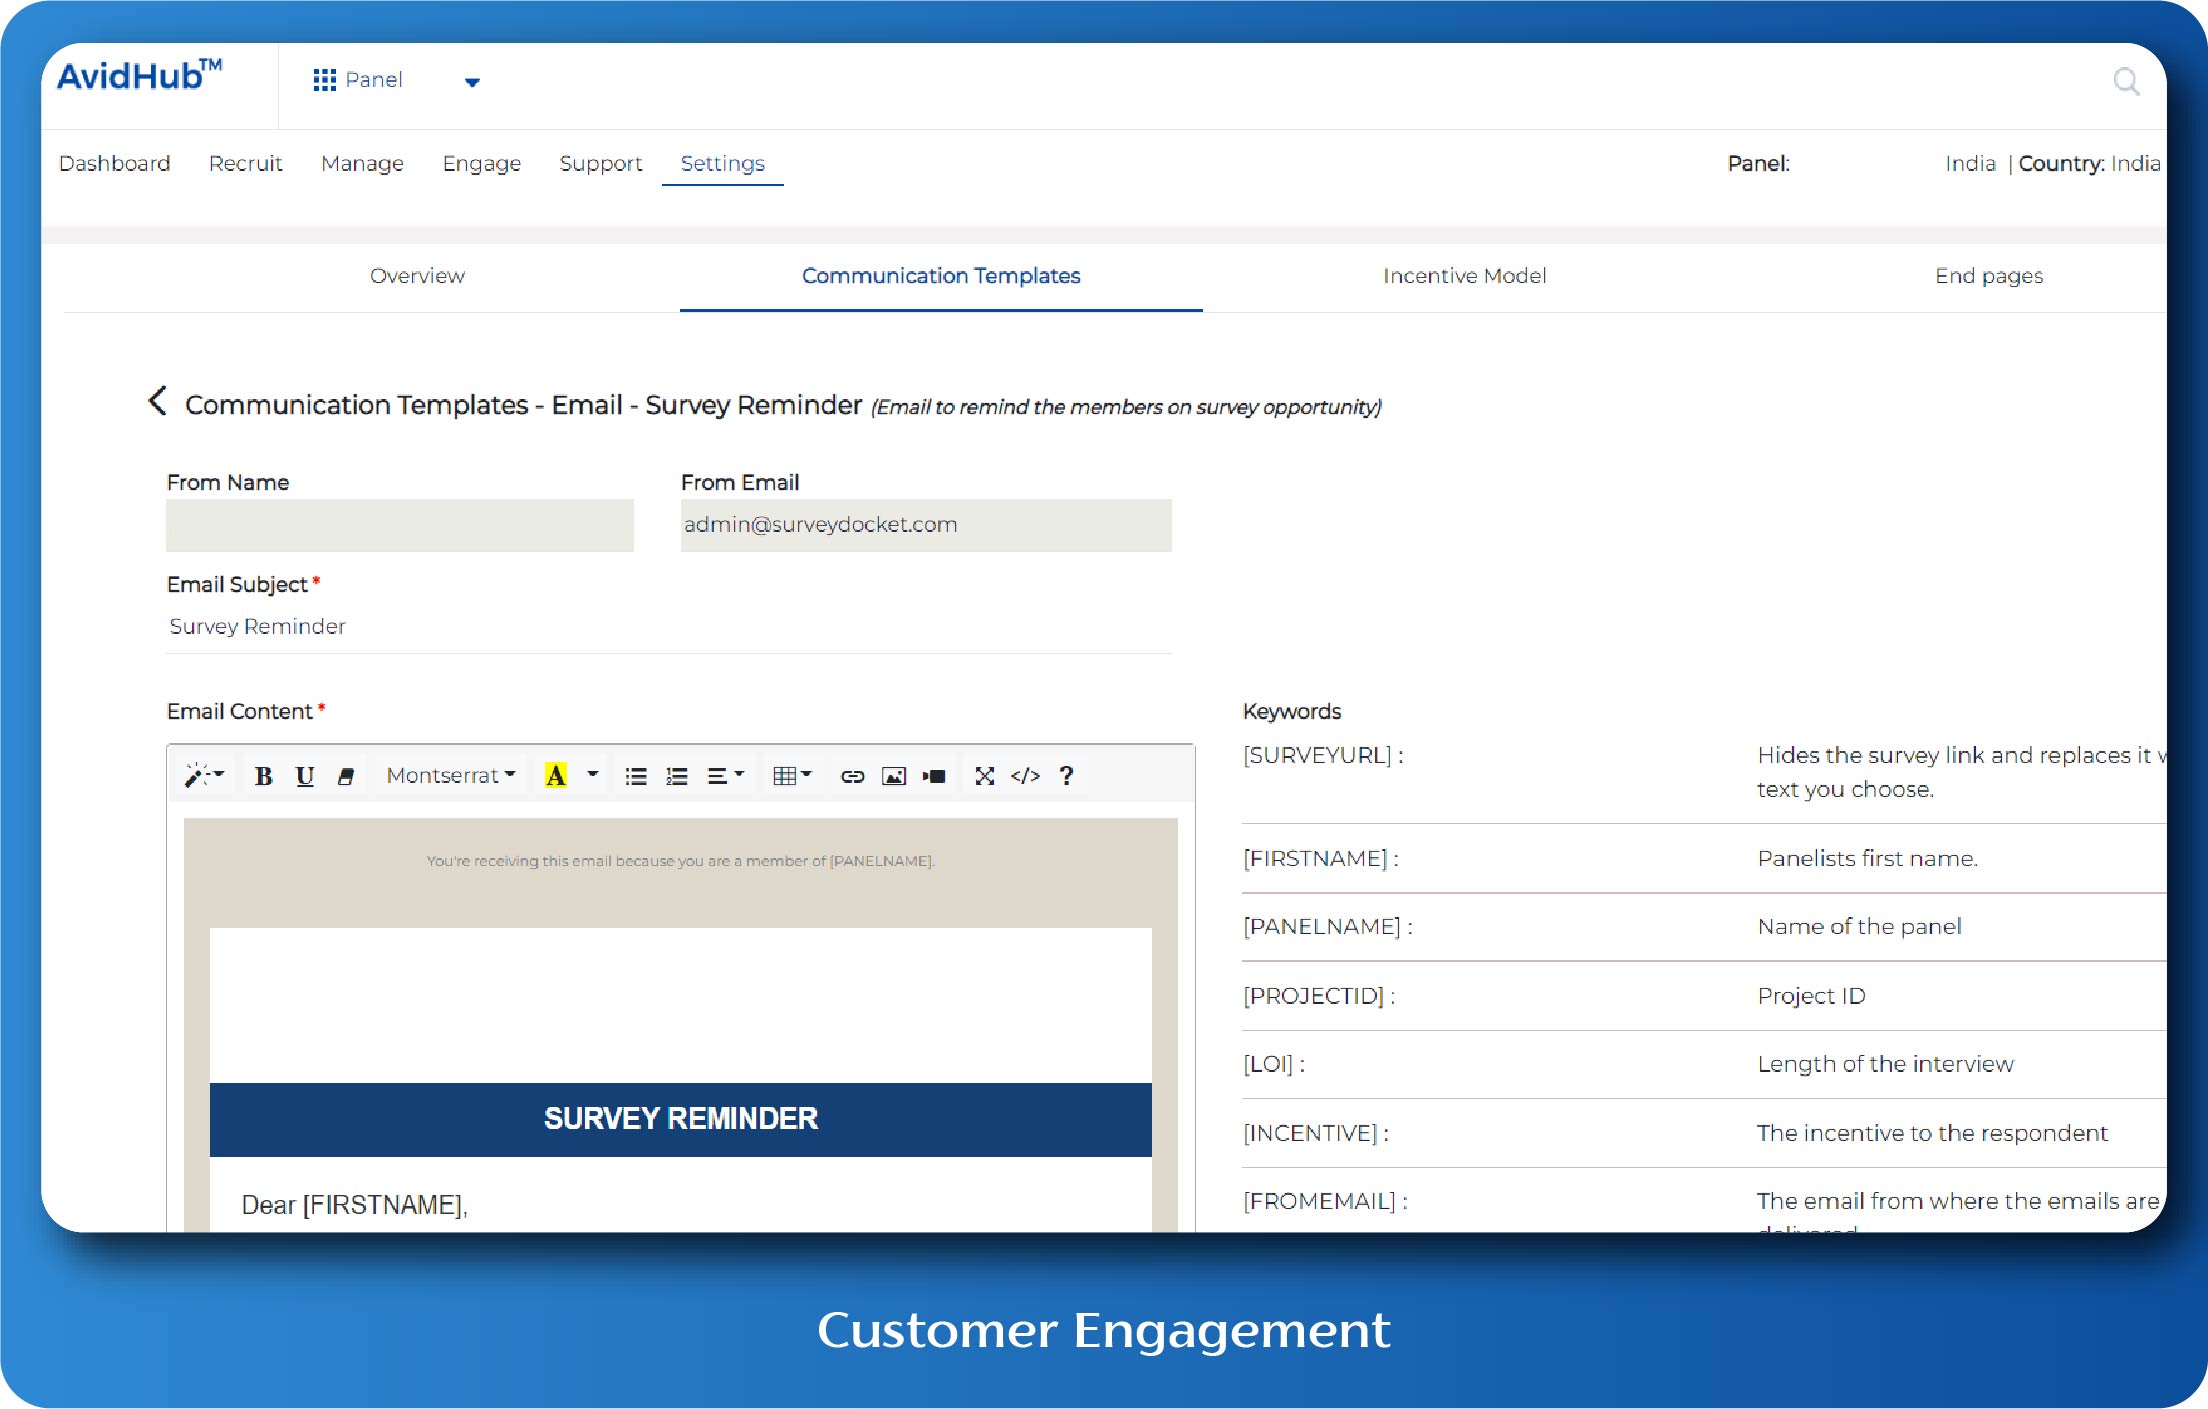 Increase customer engagement by communicating with them directly through Emails, SMS and Push Notifications